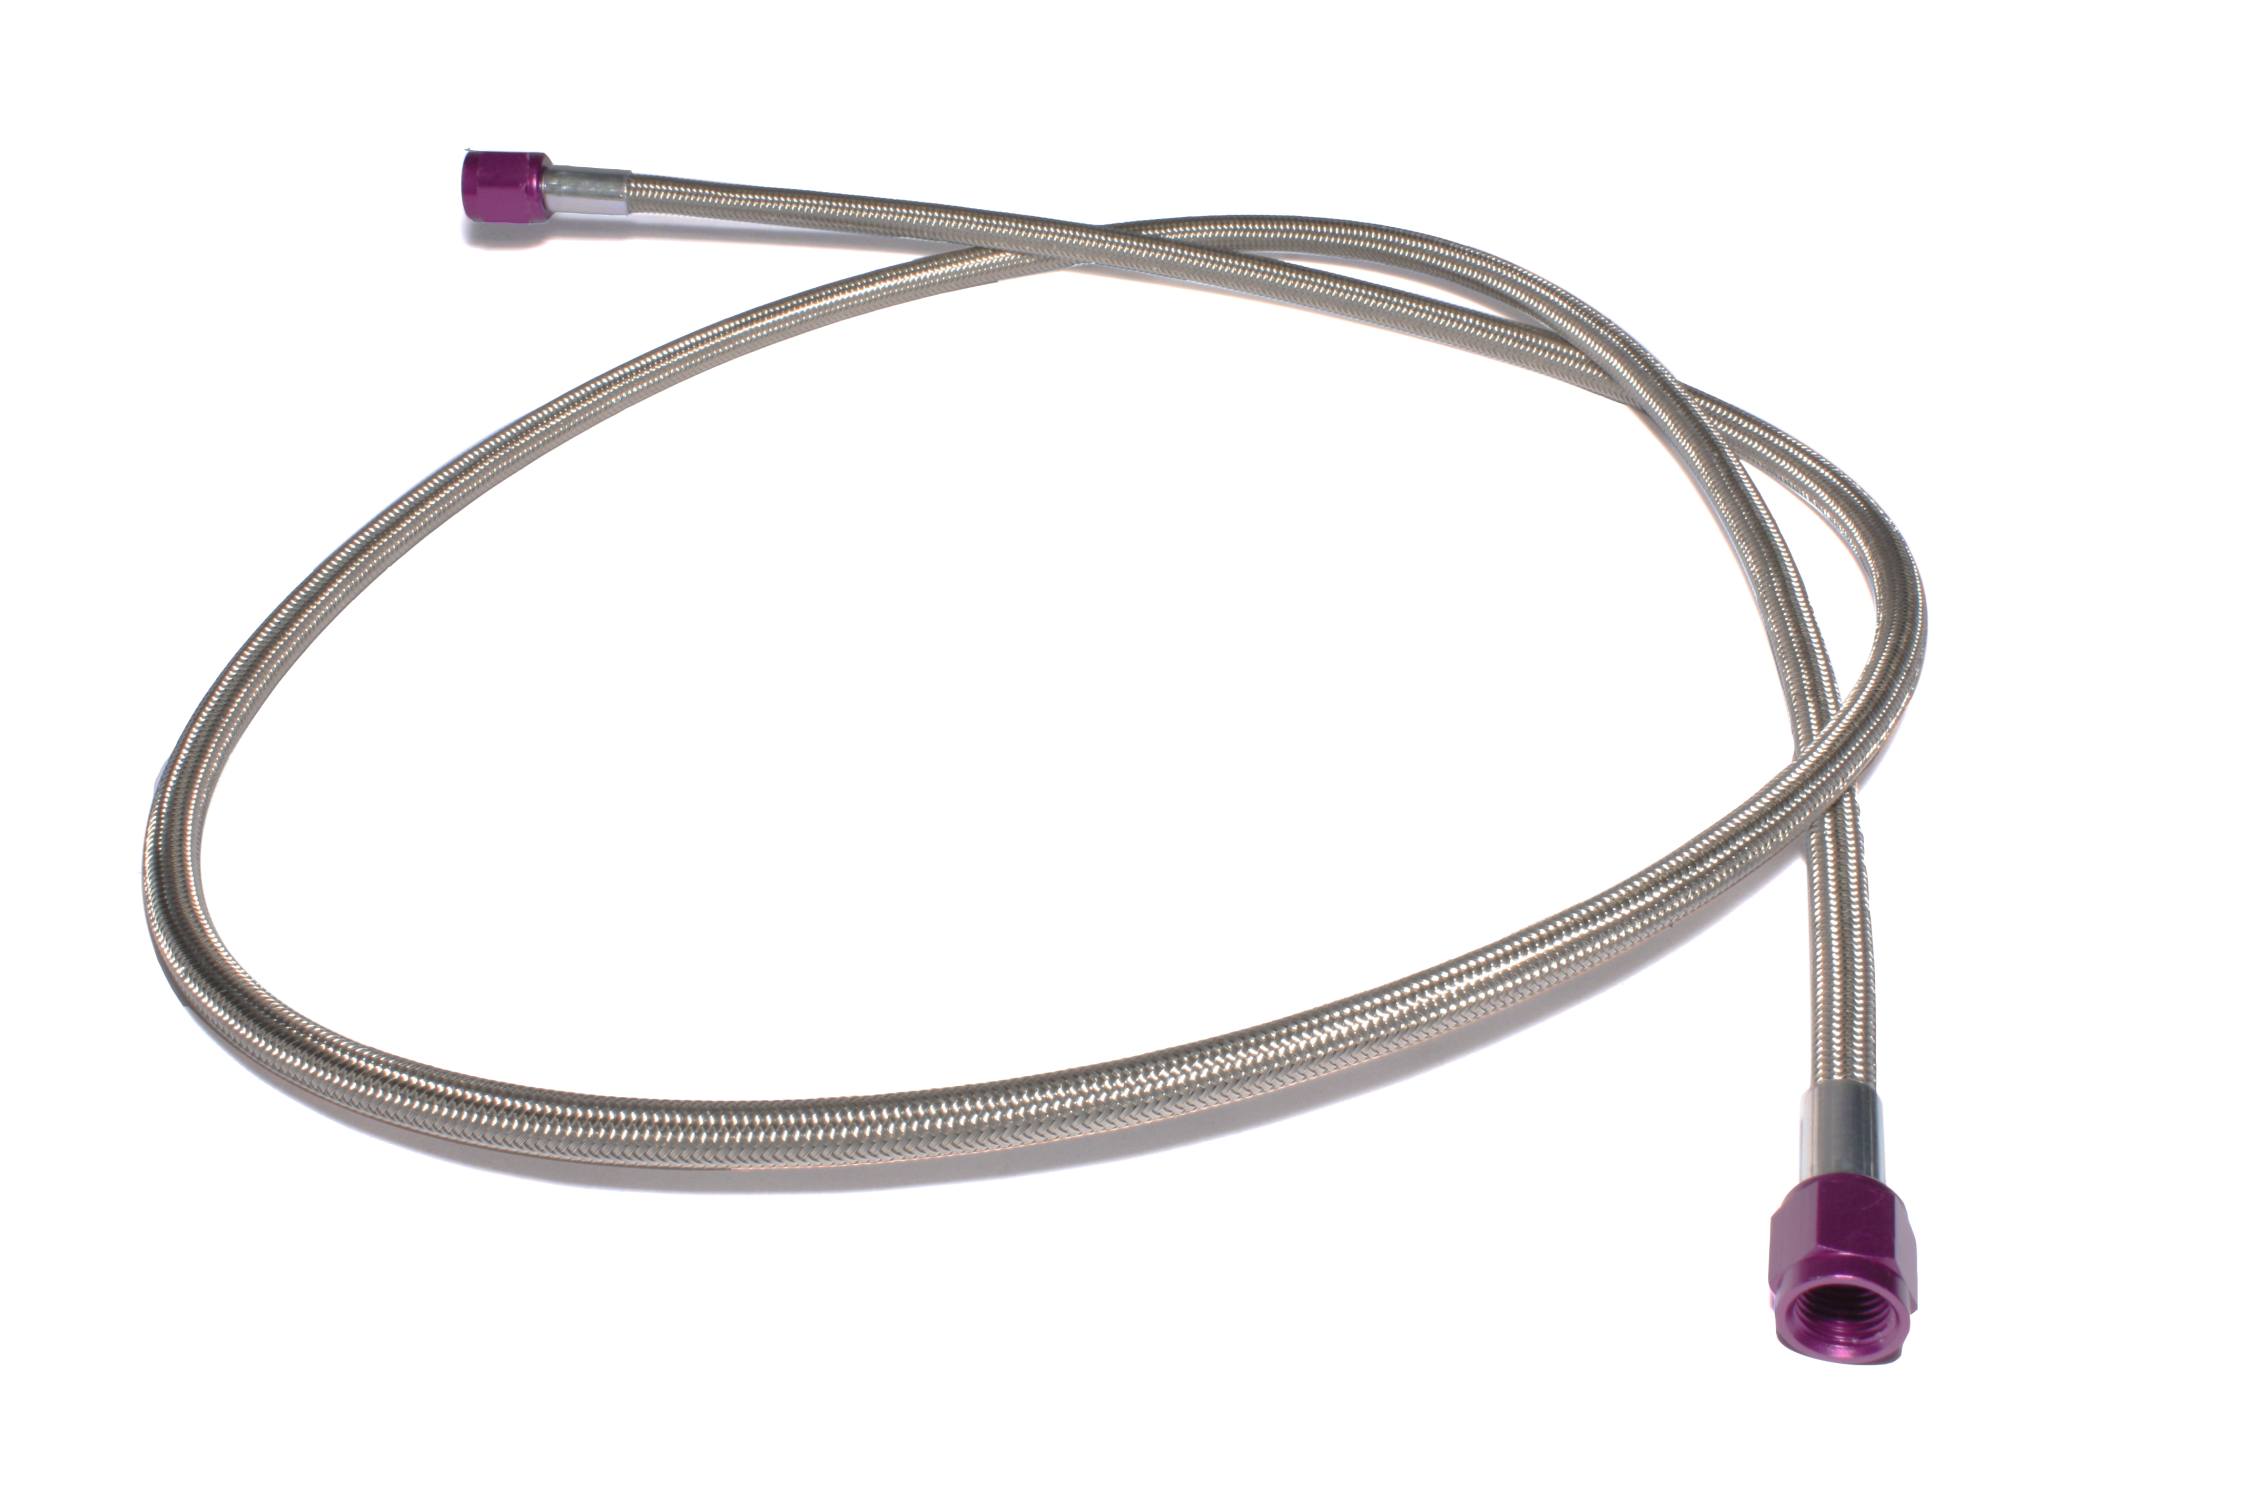 ZEX 4' (ft) Long -4AN Braided Hose with Purple Ends., 4 AN 4', Corvette, Camaro and others